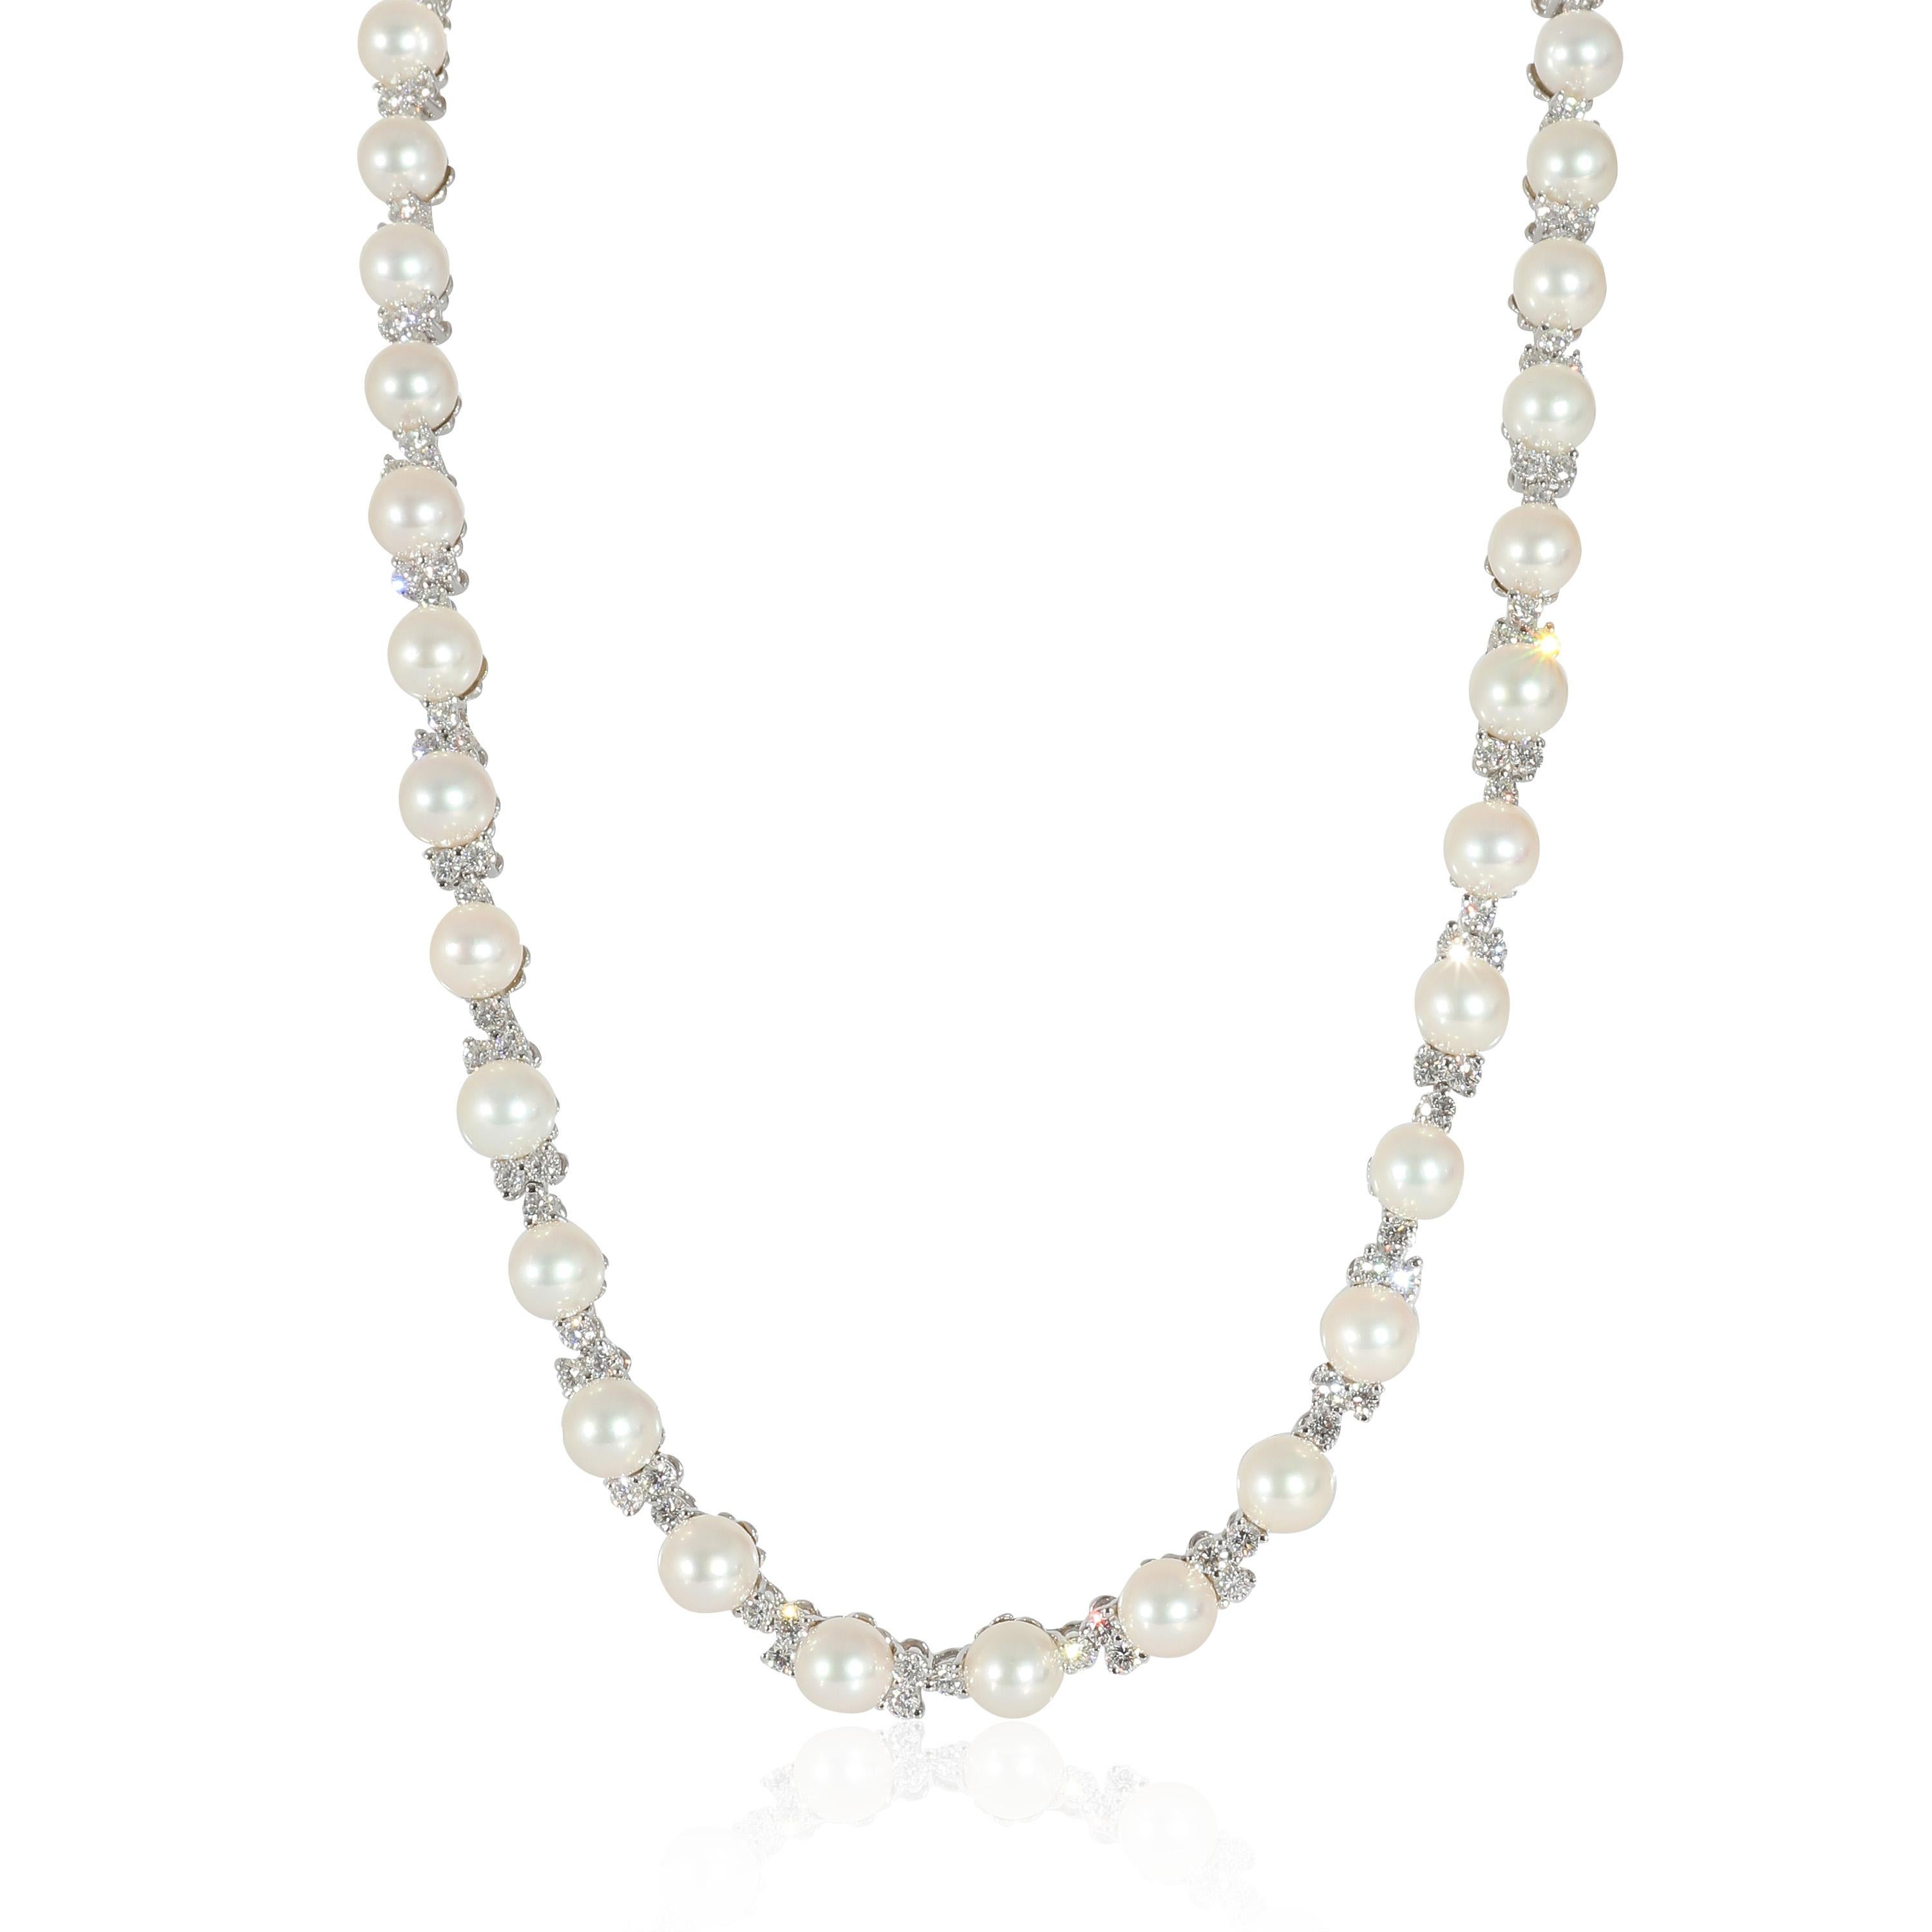 Tiffany & Co. Aria Trio Pearl & Diamonds Necklace in Platinum 4.91 CTW

PRIMARY DETAILS
SKU: 135895
Listing Title: Tiffany & Co. Aria Trio Pearl & Diamonds Necklace in Platinum 4.91 CTW
Condition Description: Retails for 31500 USD. In excellent